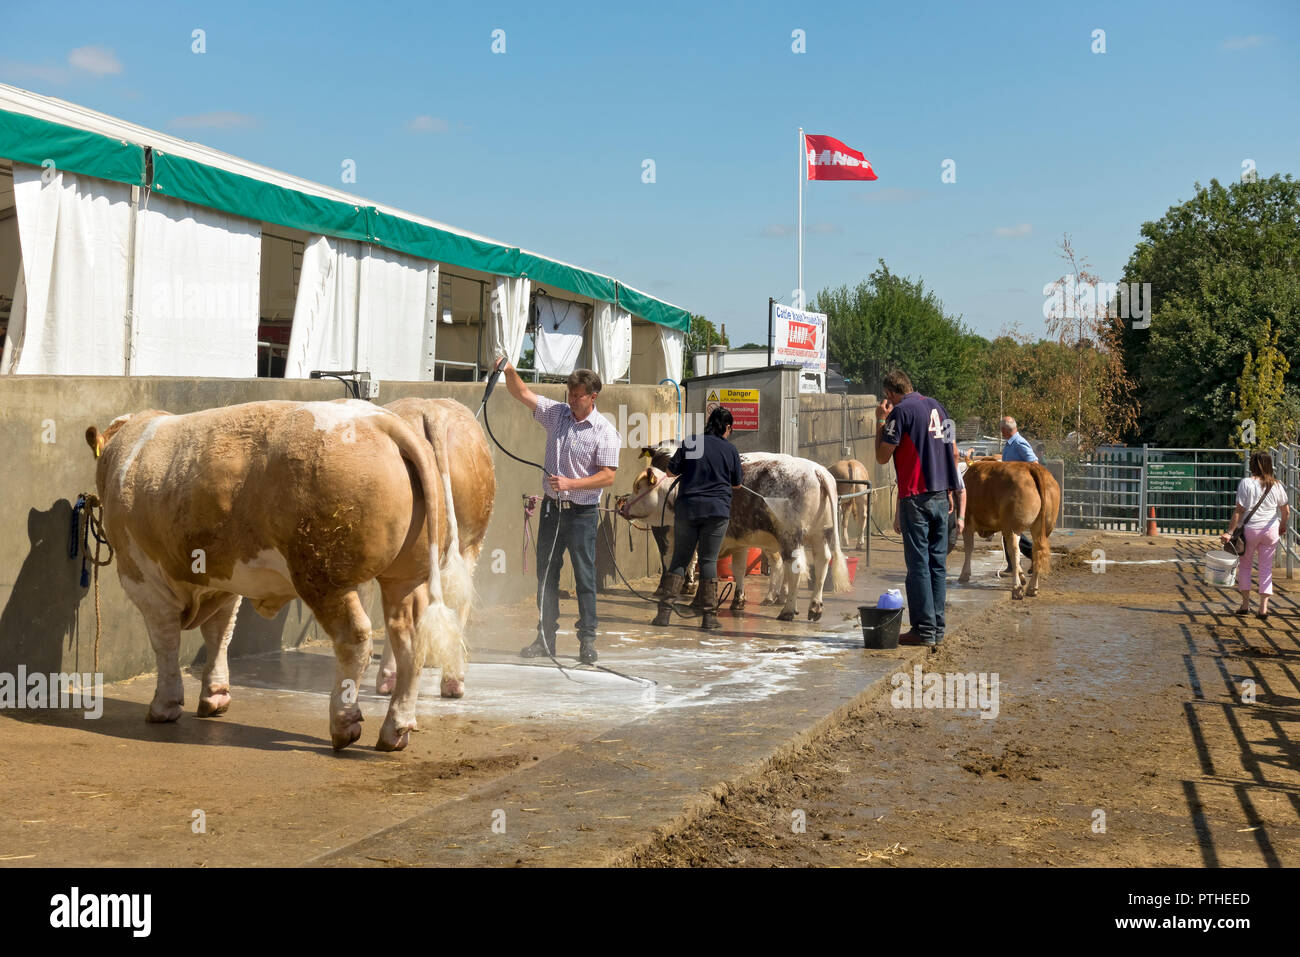 Cattle livestock cows being washed by farmer farmers before judging Great Yorkshire Show Harrogate North Yorkshire England UK United Kingdom Britain Stock Photo